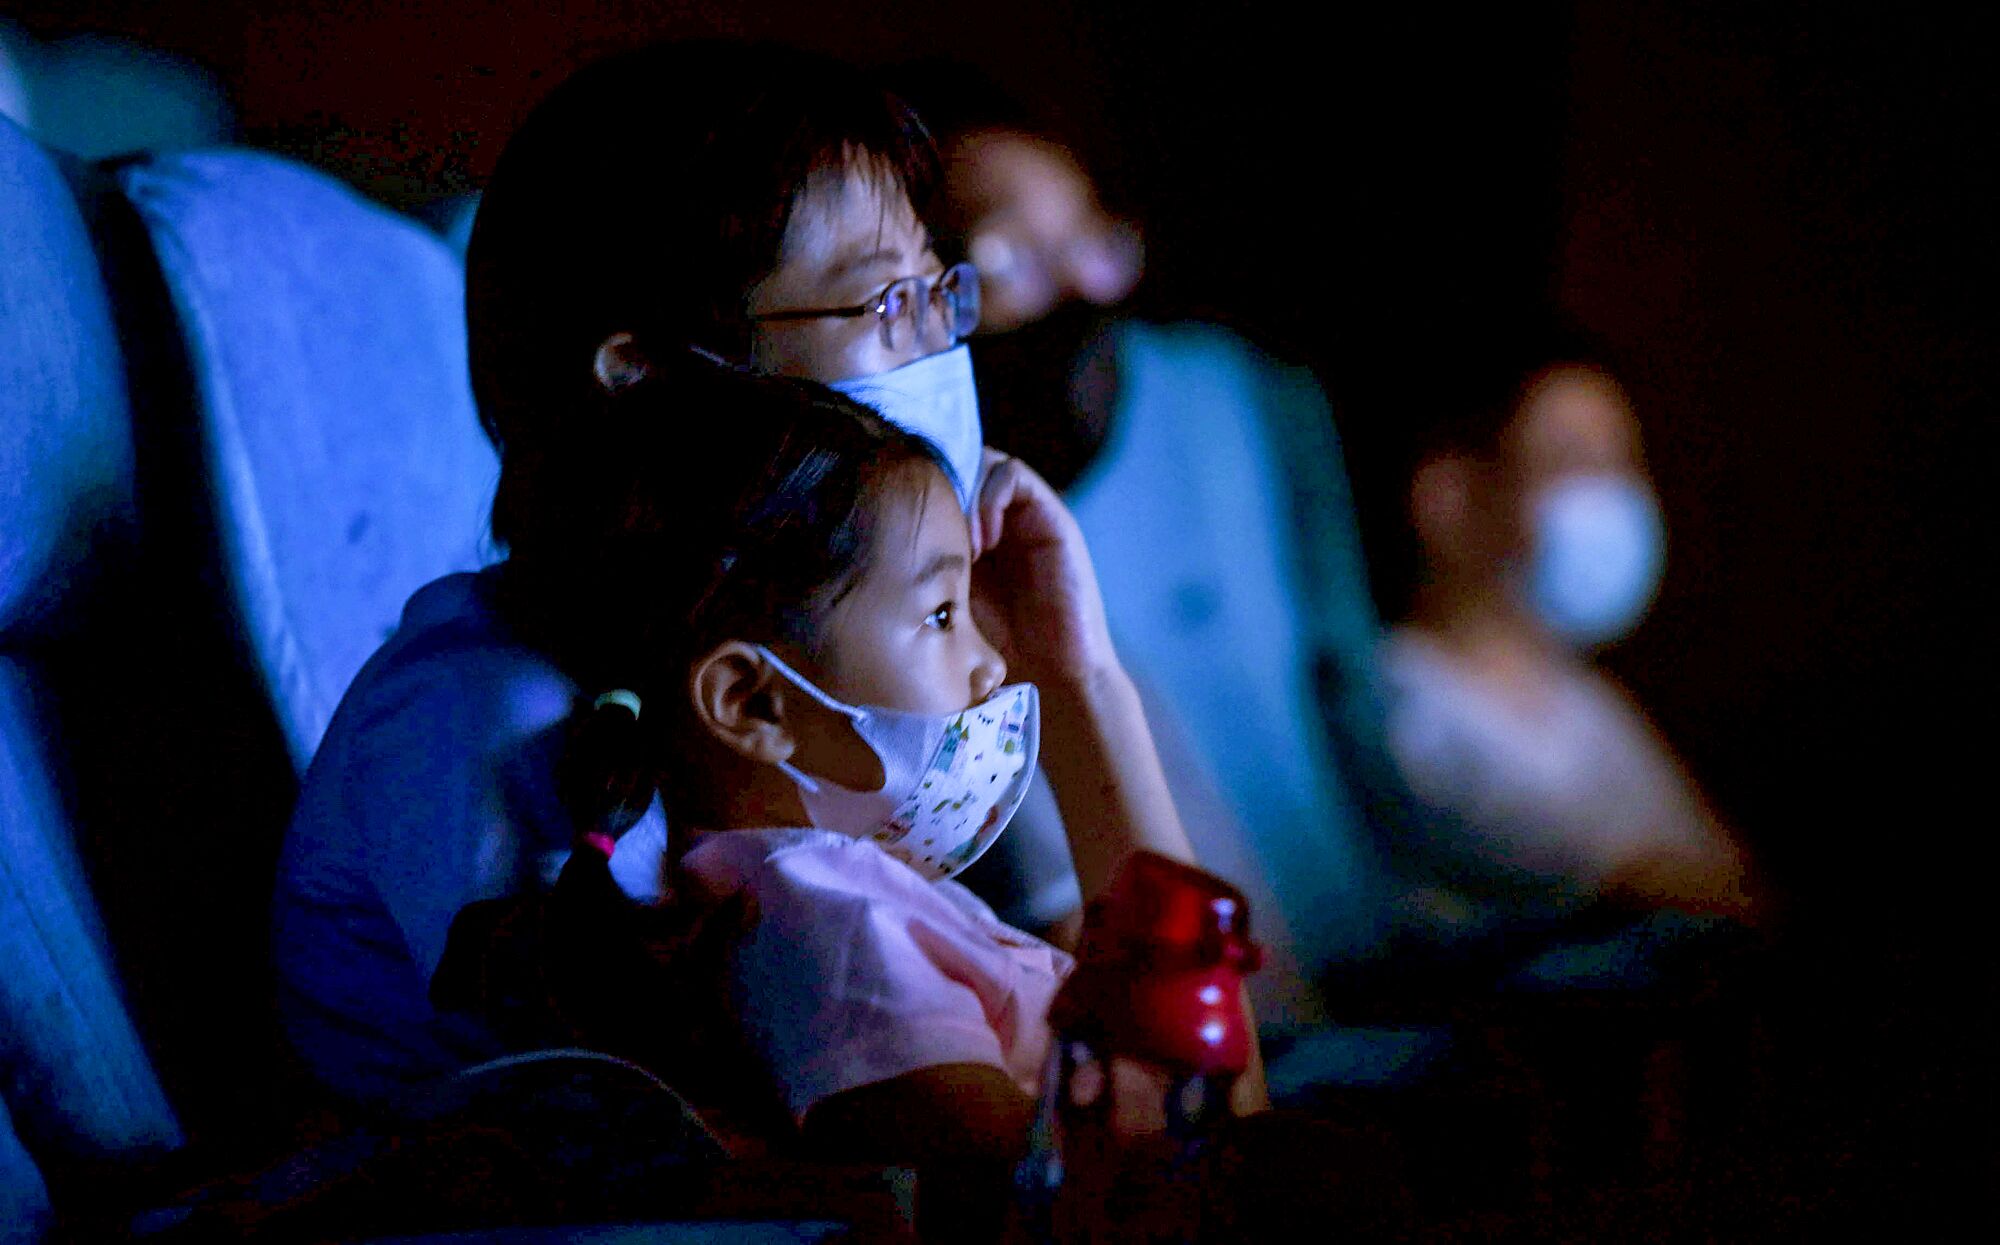 A man and young girl, wearing masks, watch a movie inside a theater.